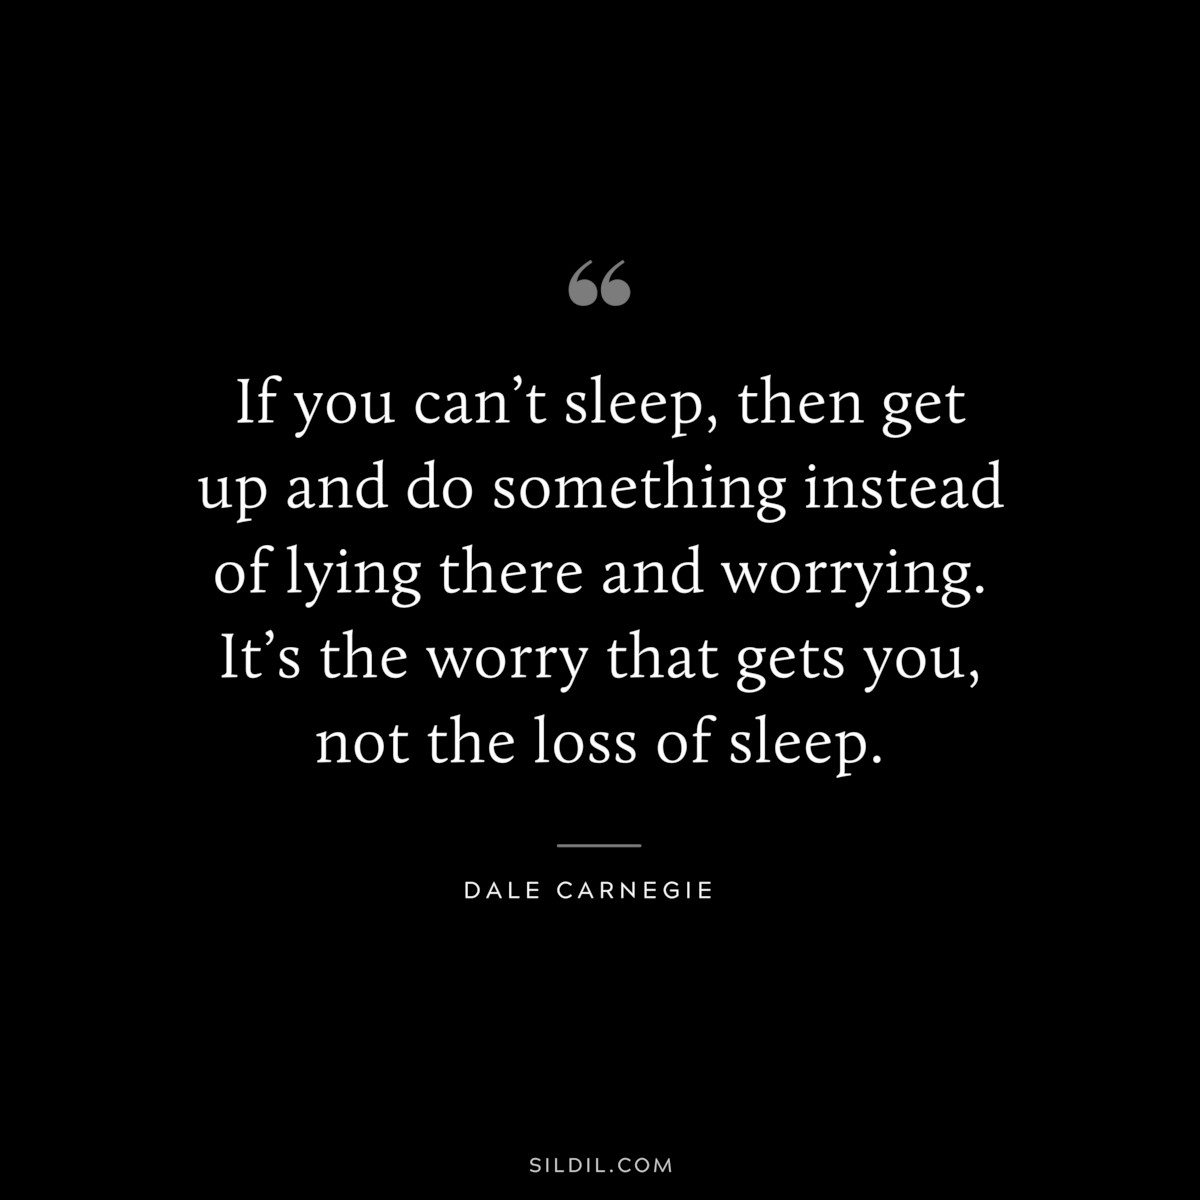 If you can’t sleep, then get up and do something instead of lying there and worrying. It’s the worry that gets you, not the loss of sleep.― Dale Carnegie